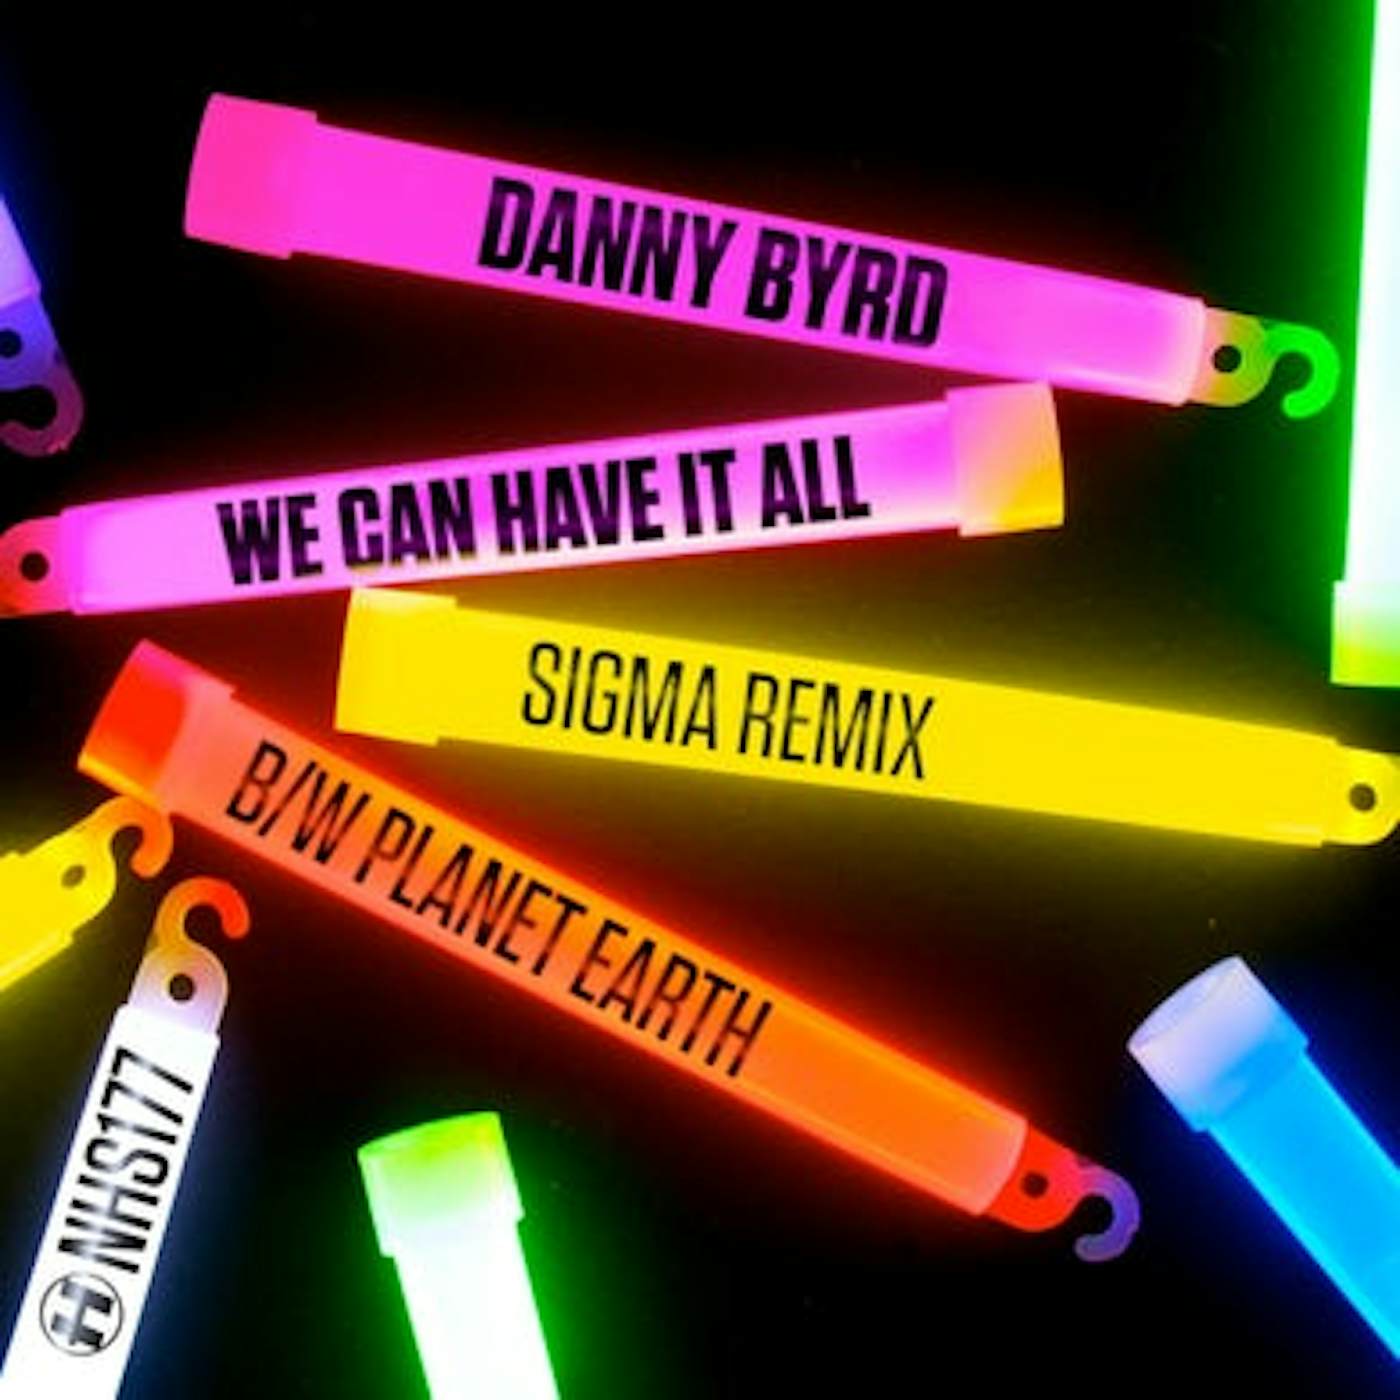 Danny Byrd WE CAN HAVE IT ALL (SIGMA RMX)/PLANET EARTH Vinyl Record - UK Release